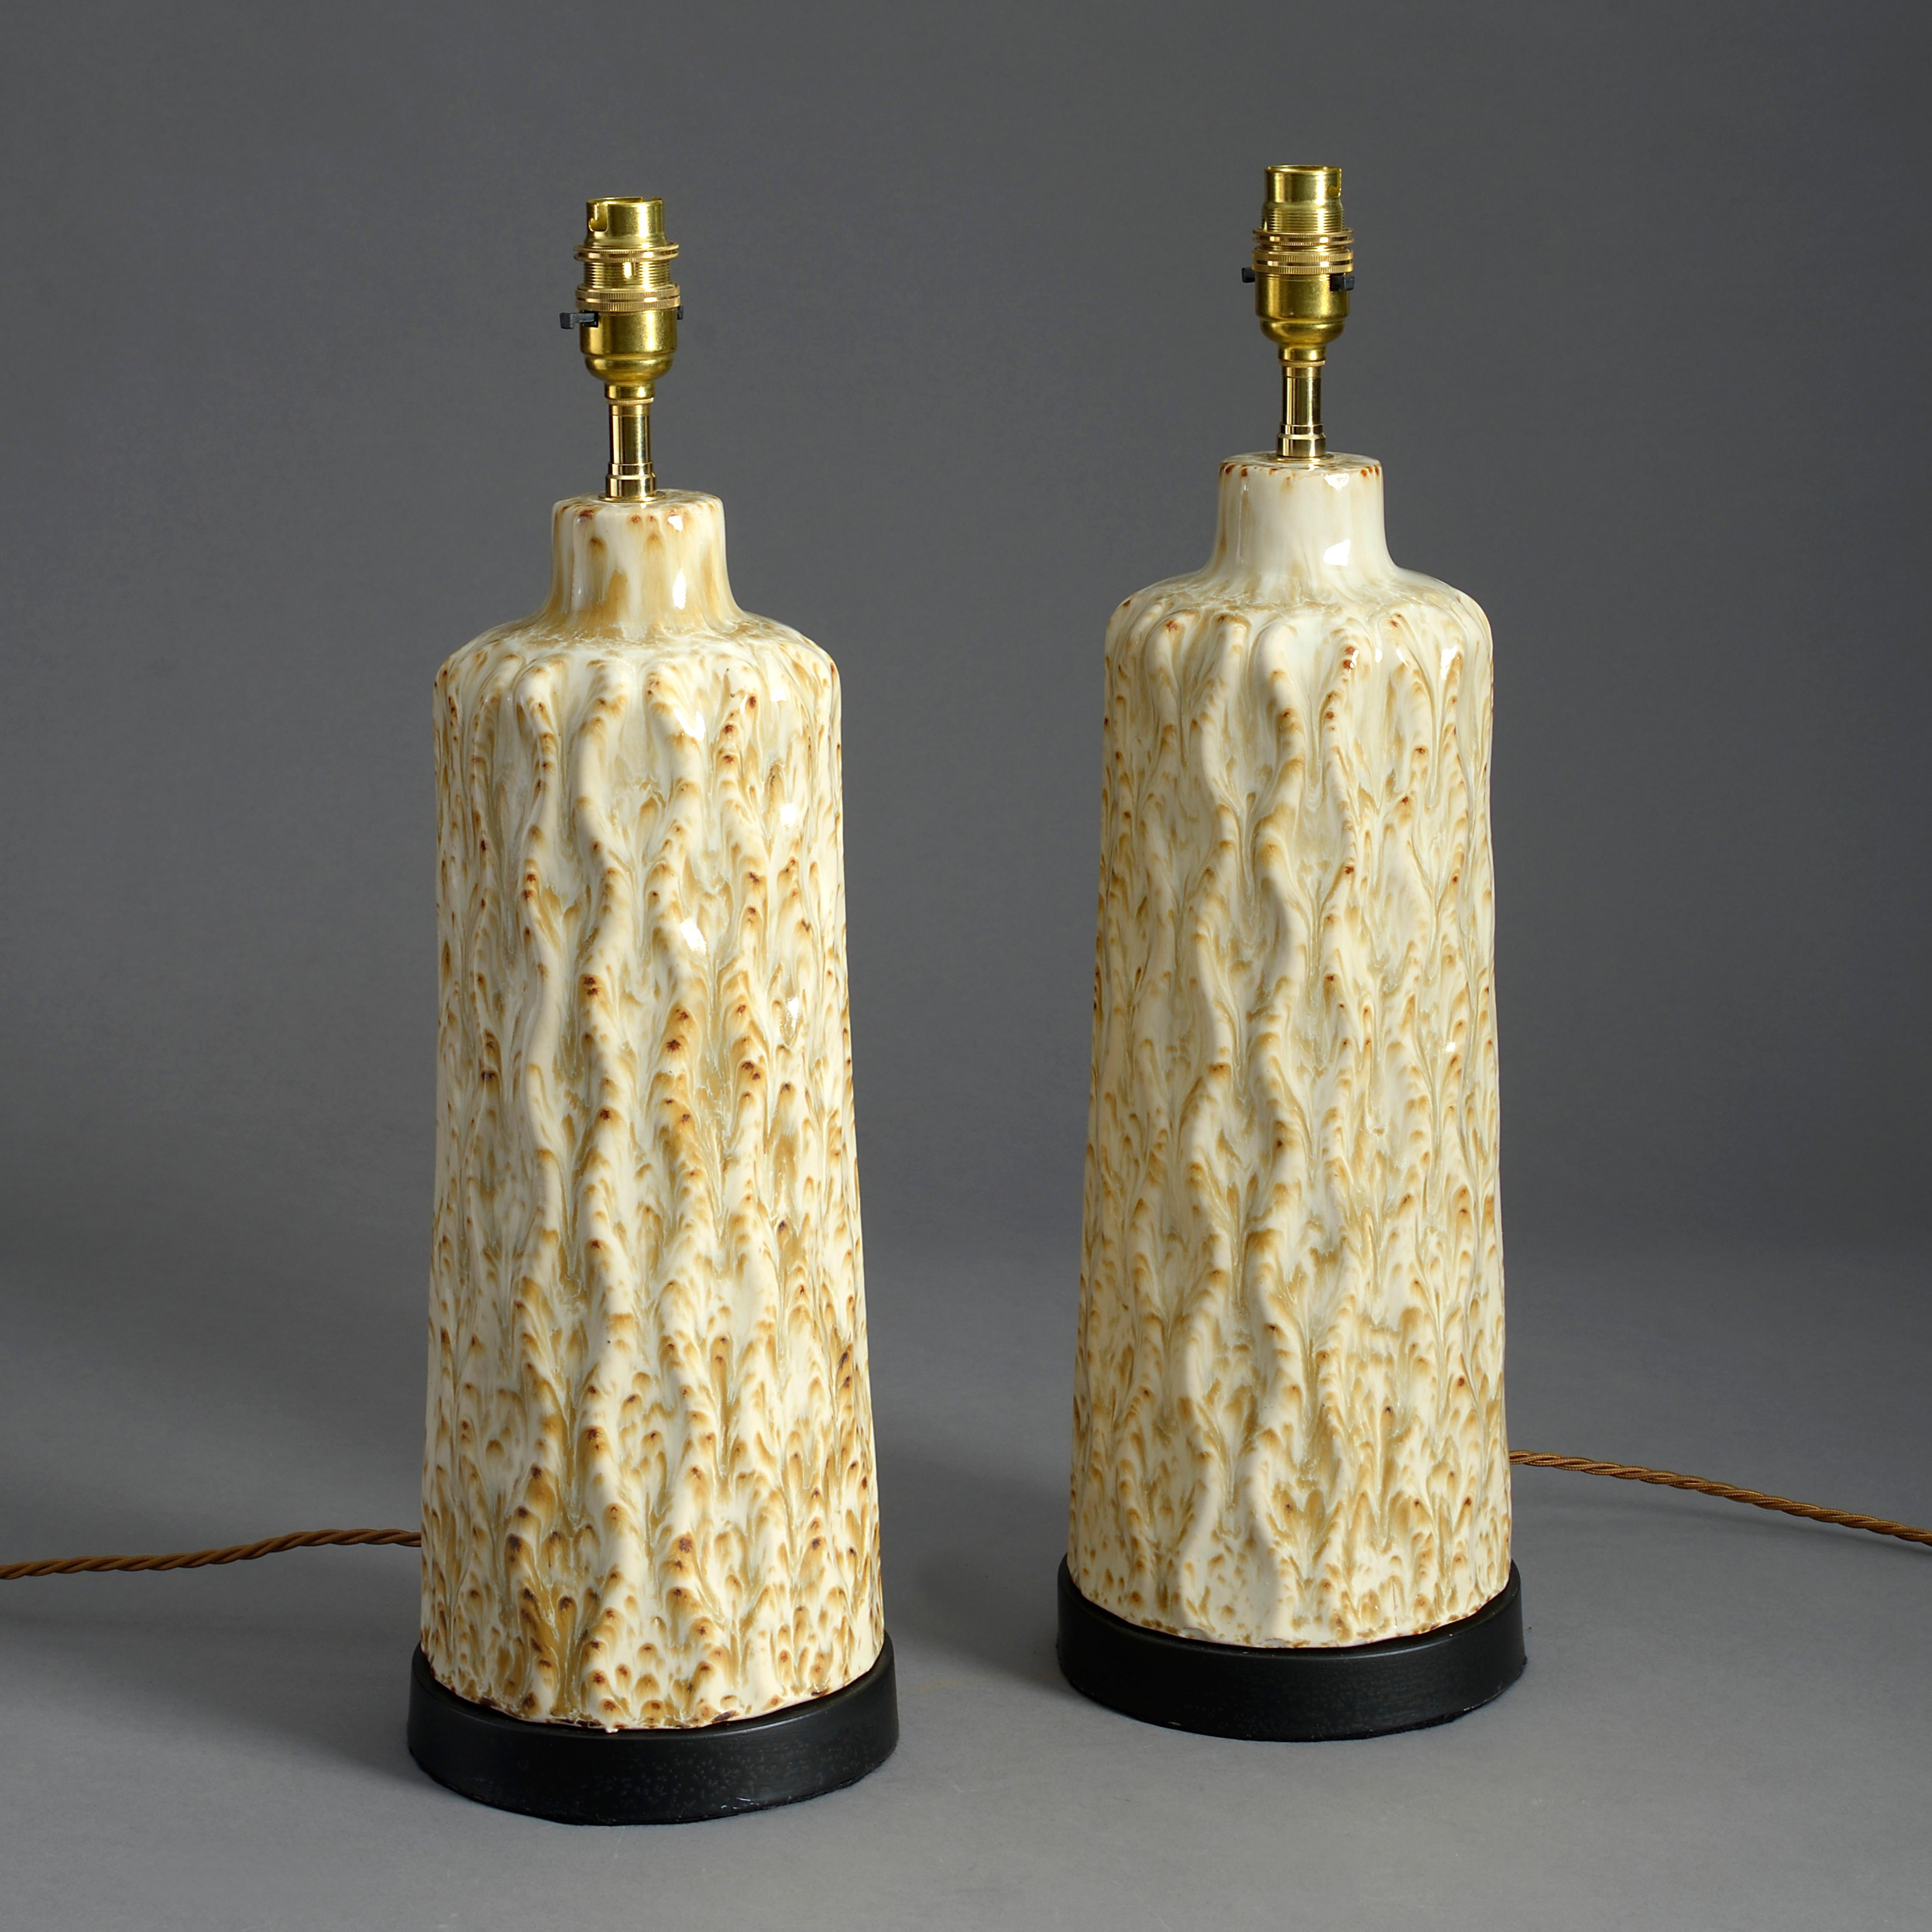 A pair of mid-twentieth century cream glazed ceramic lamps, with faux tree bark surfaces and set upon painted tole bases. 

Shades not included.